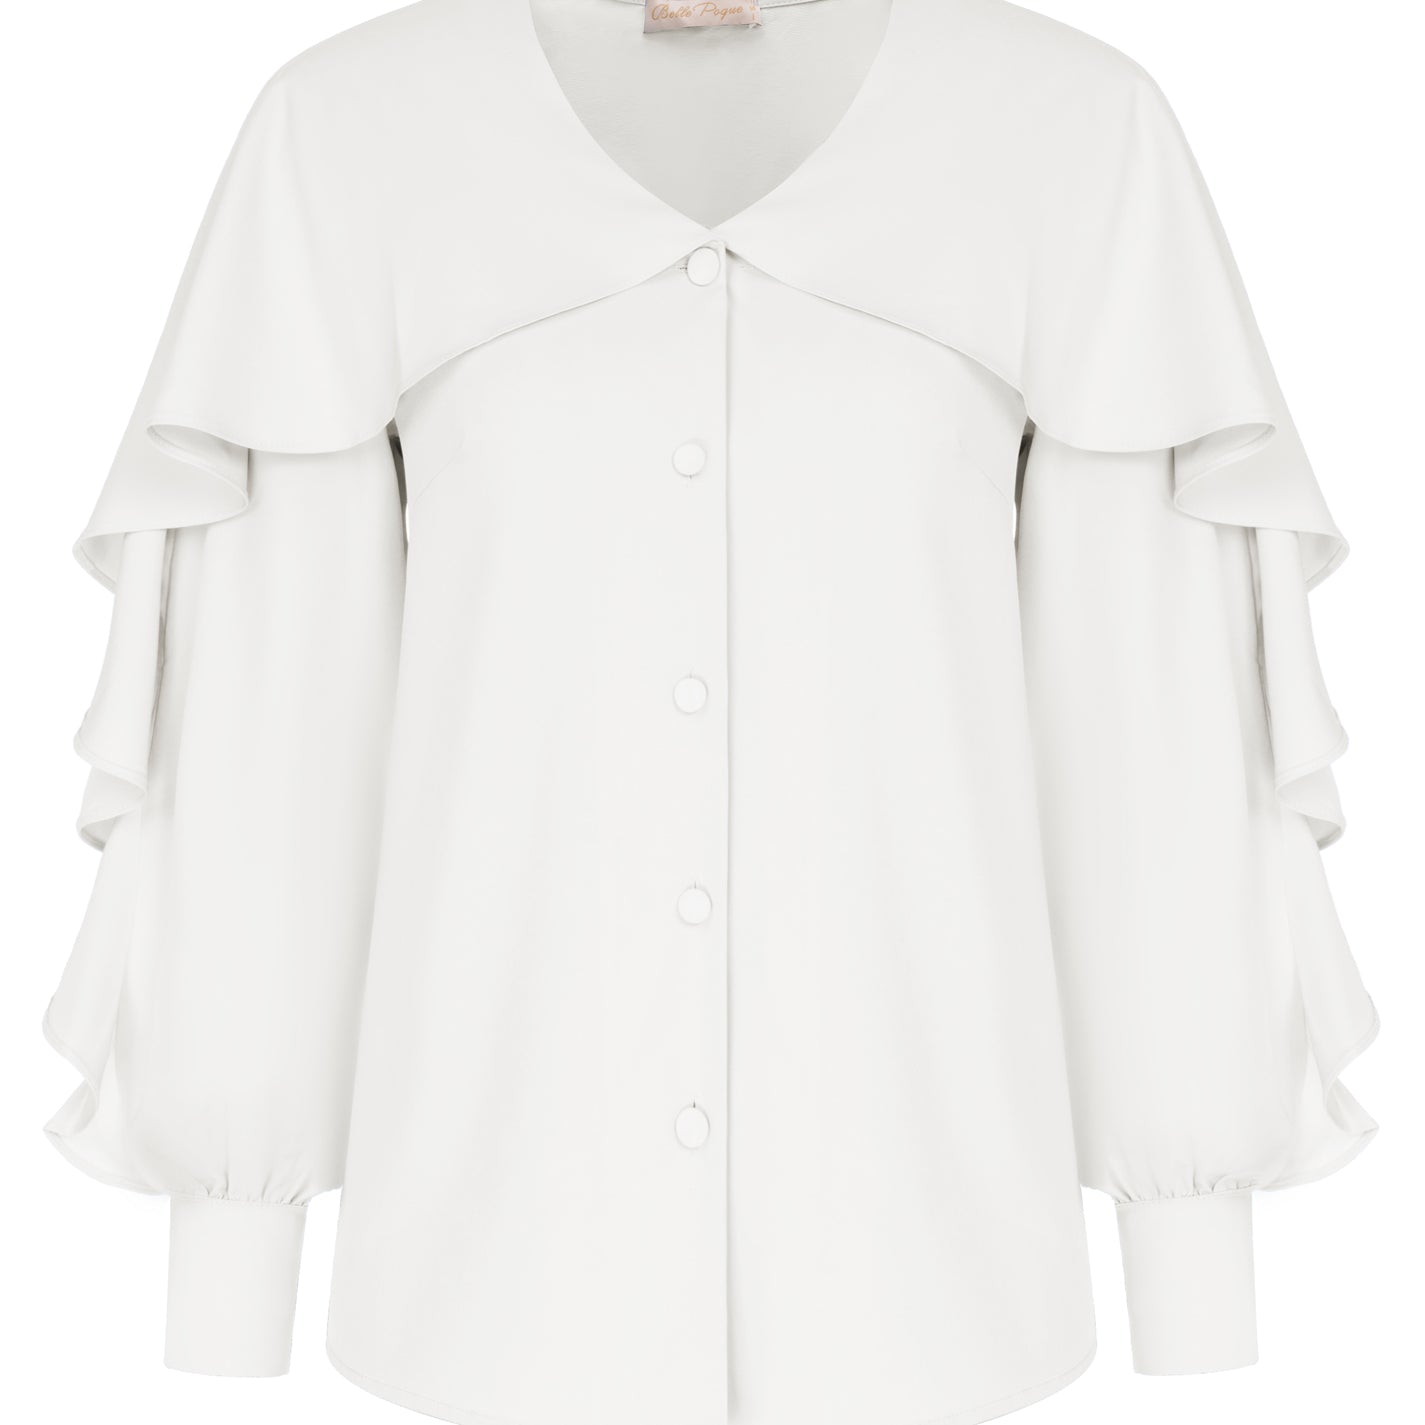 Seckill Offer⌛Ruffle Decorated Shirt Long Sleeve V-Neck Button-up Tops